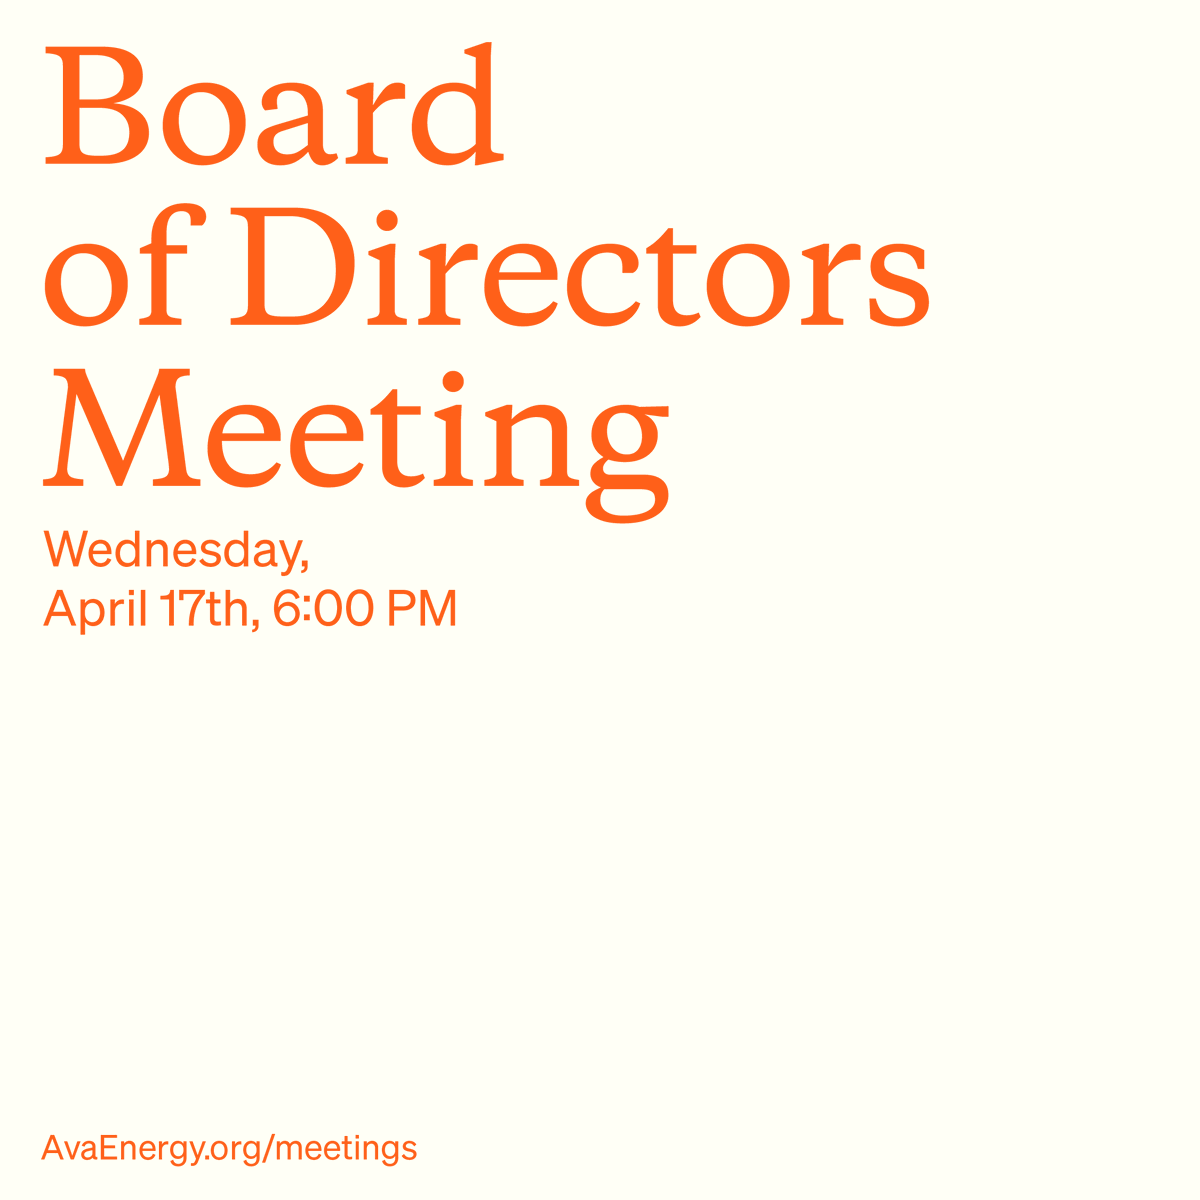 Ava's Board of Directors meets tomorrow, Wednesday, April 17 at 6pm. Meetings are open to the public and we welcome public comment. This meeting will be held in a hybrid format. Learn more: ow.ly/FzZM50RfgFG